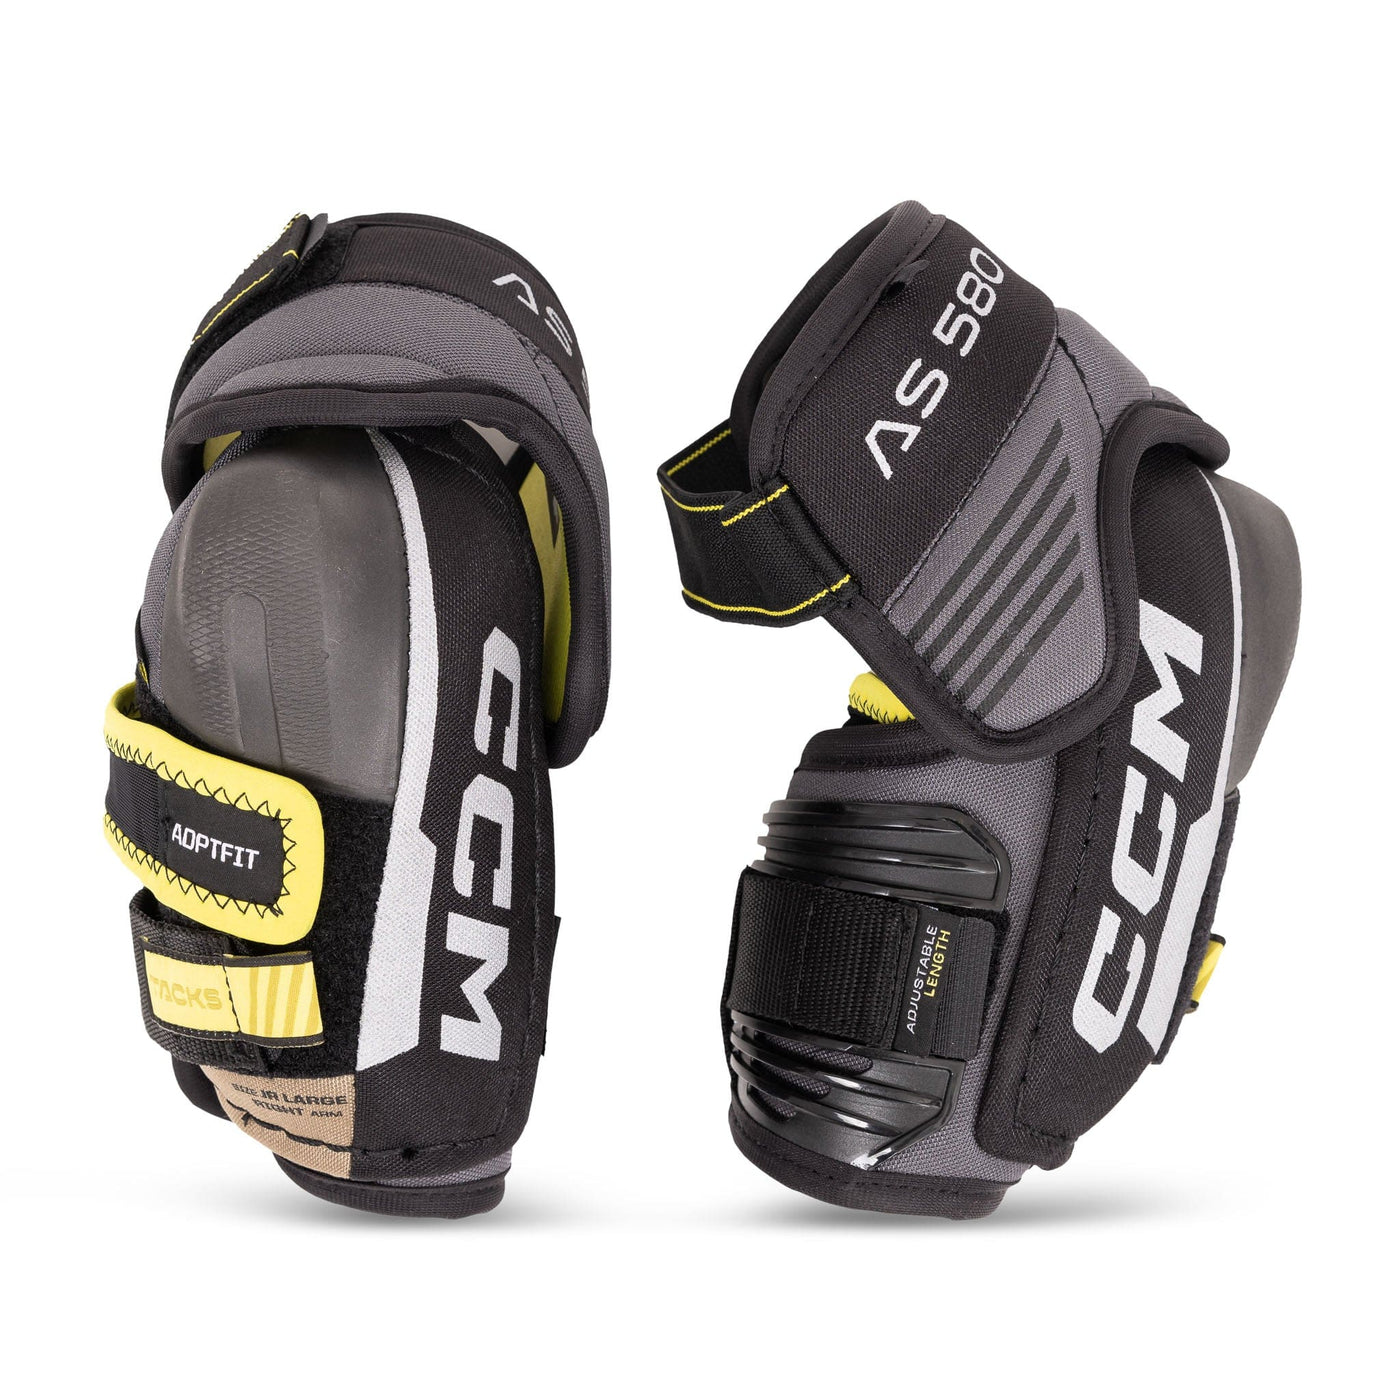 CCM Tacks AS580 Junior Hockey Elbow Pads - The Hockey Shop Source For Sports